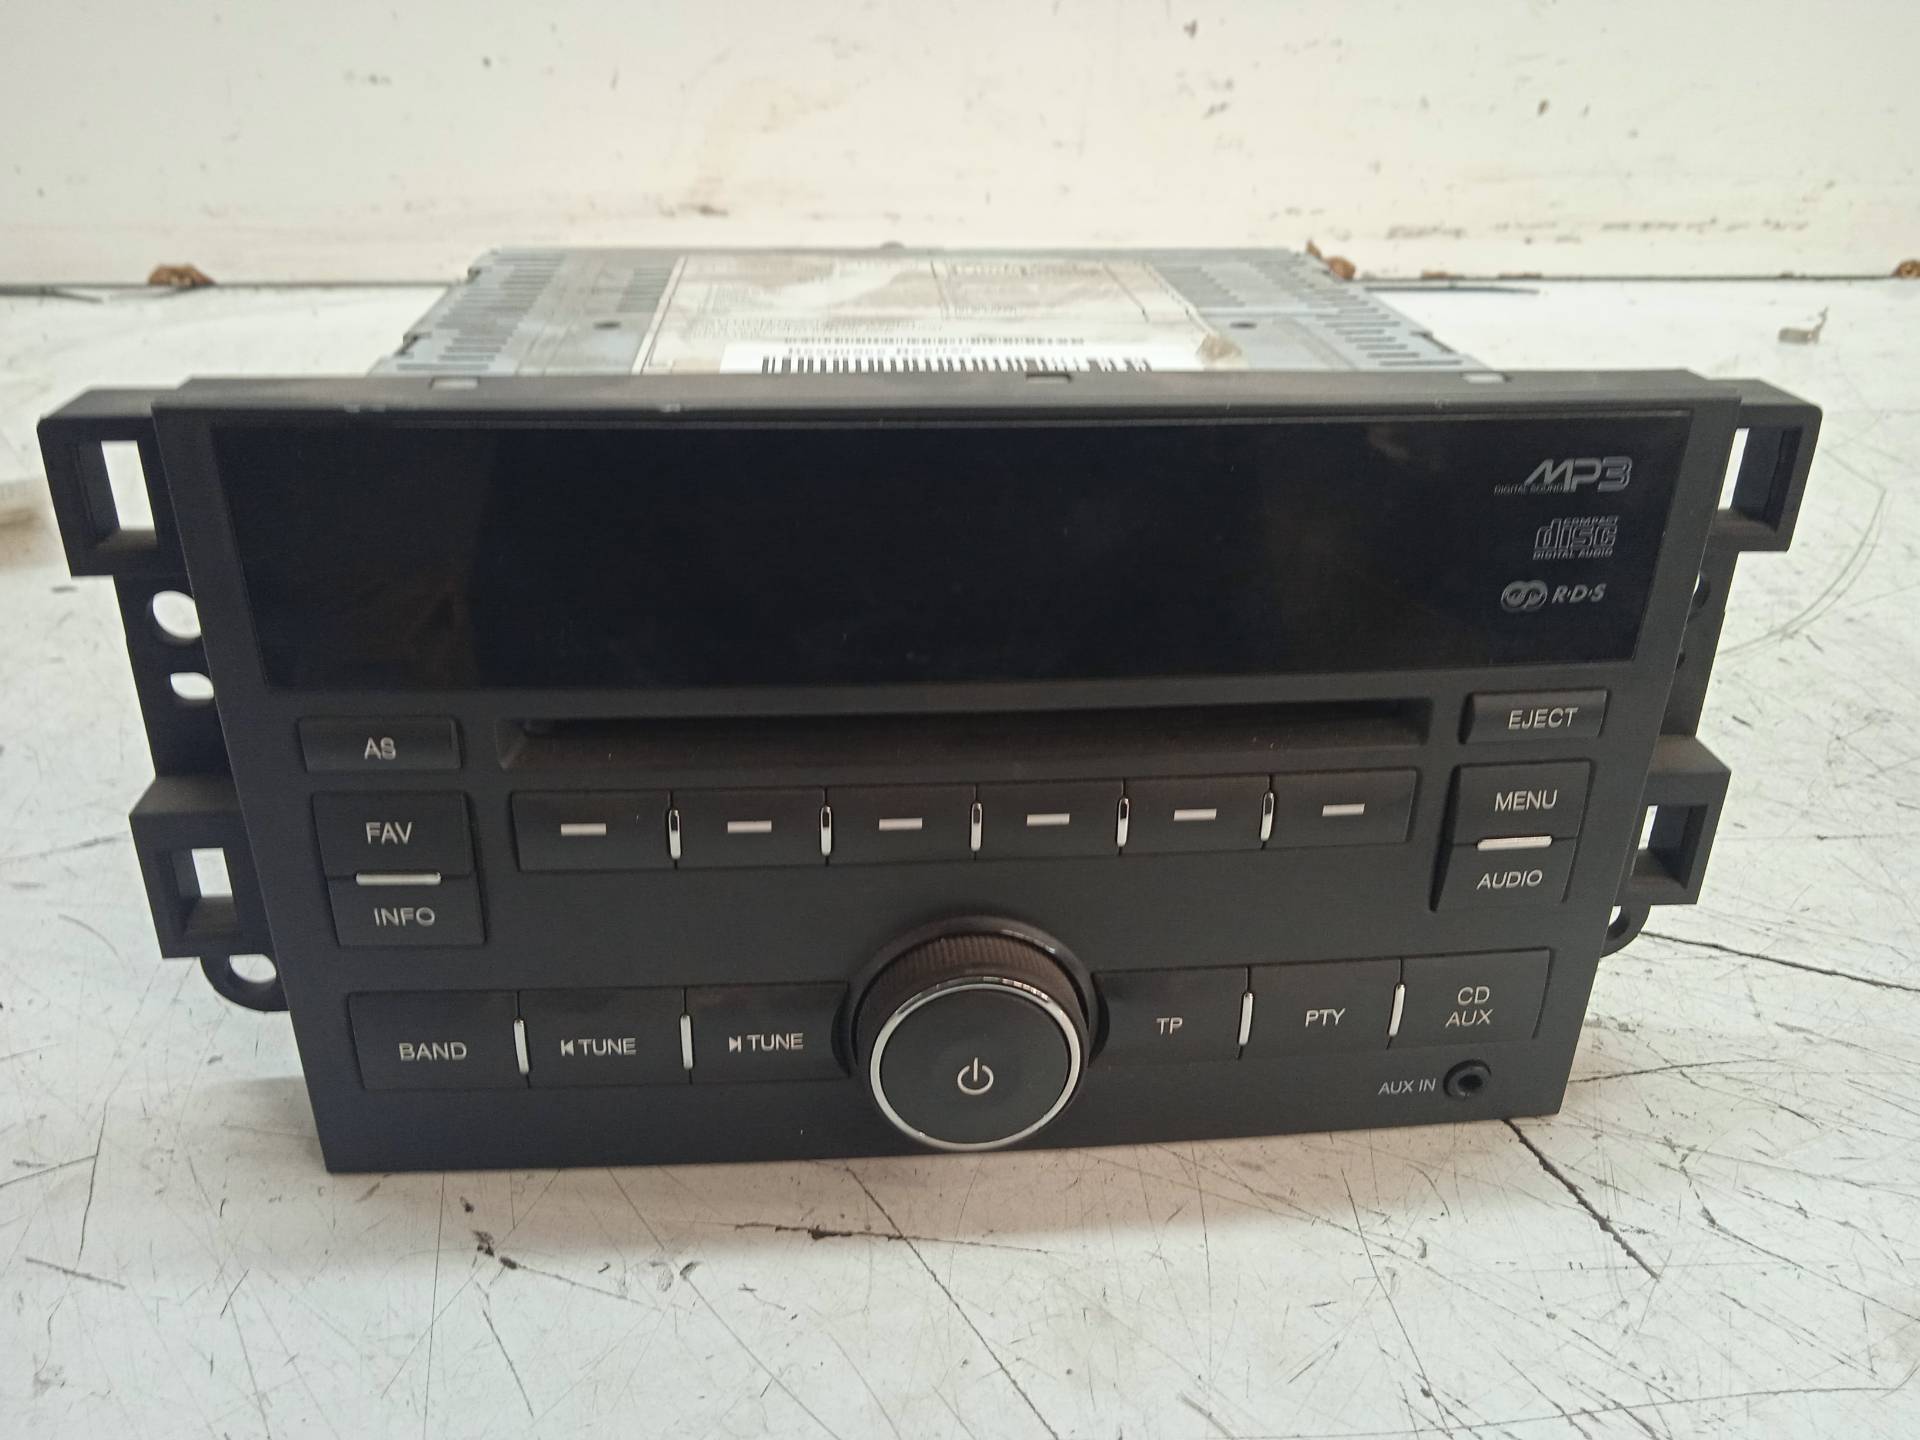 CHEVROLET Aveo T200 (2003-2012) Music Player Without GPS 233717170223, 223 24311090